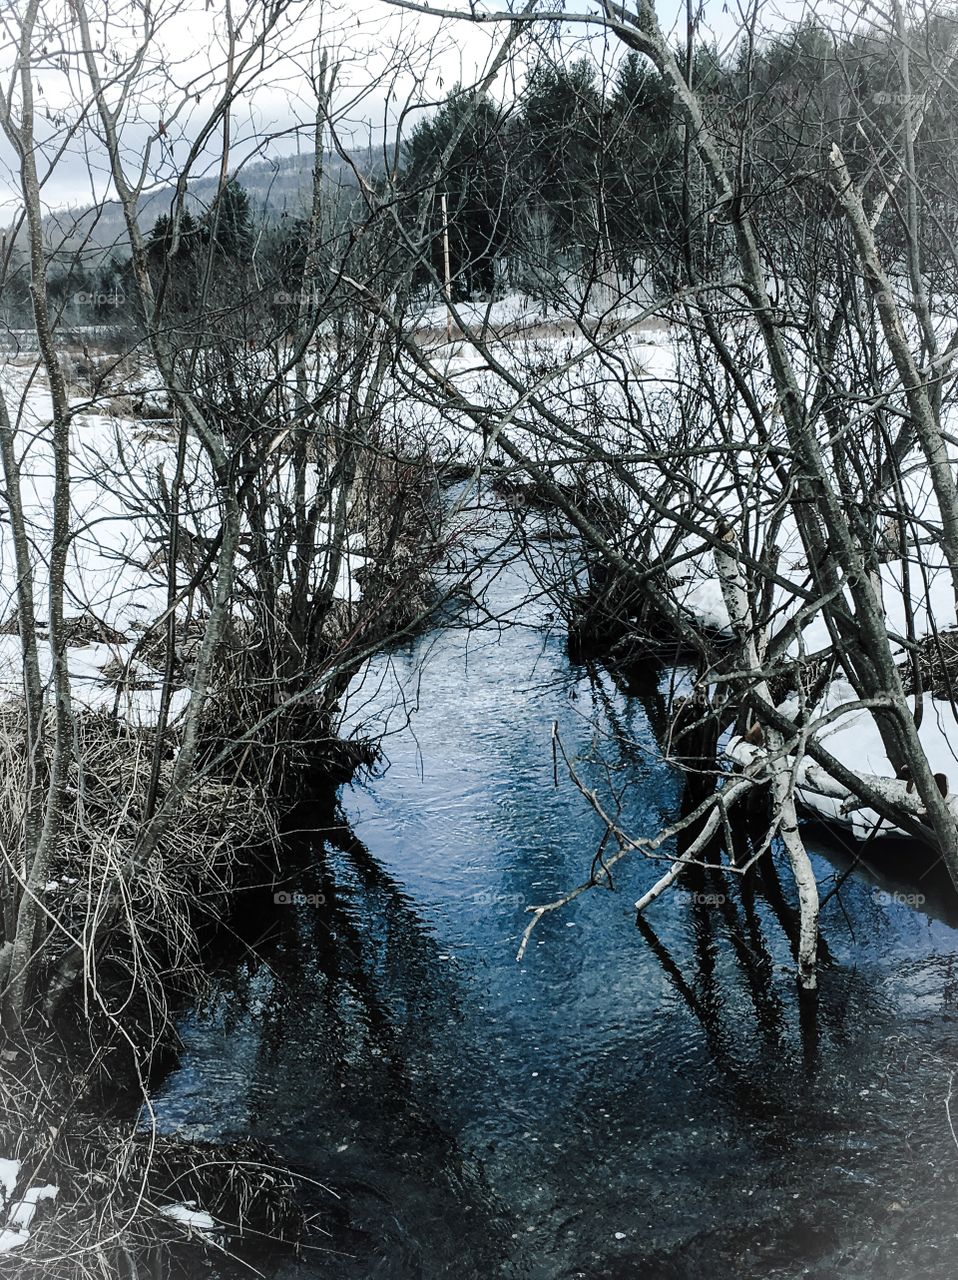 Blue brook. An early spring day in rural Vermont.  It was cold, windy and there was still snow on the ground. 